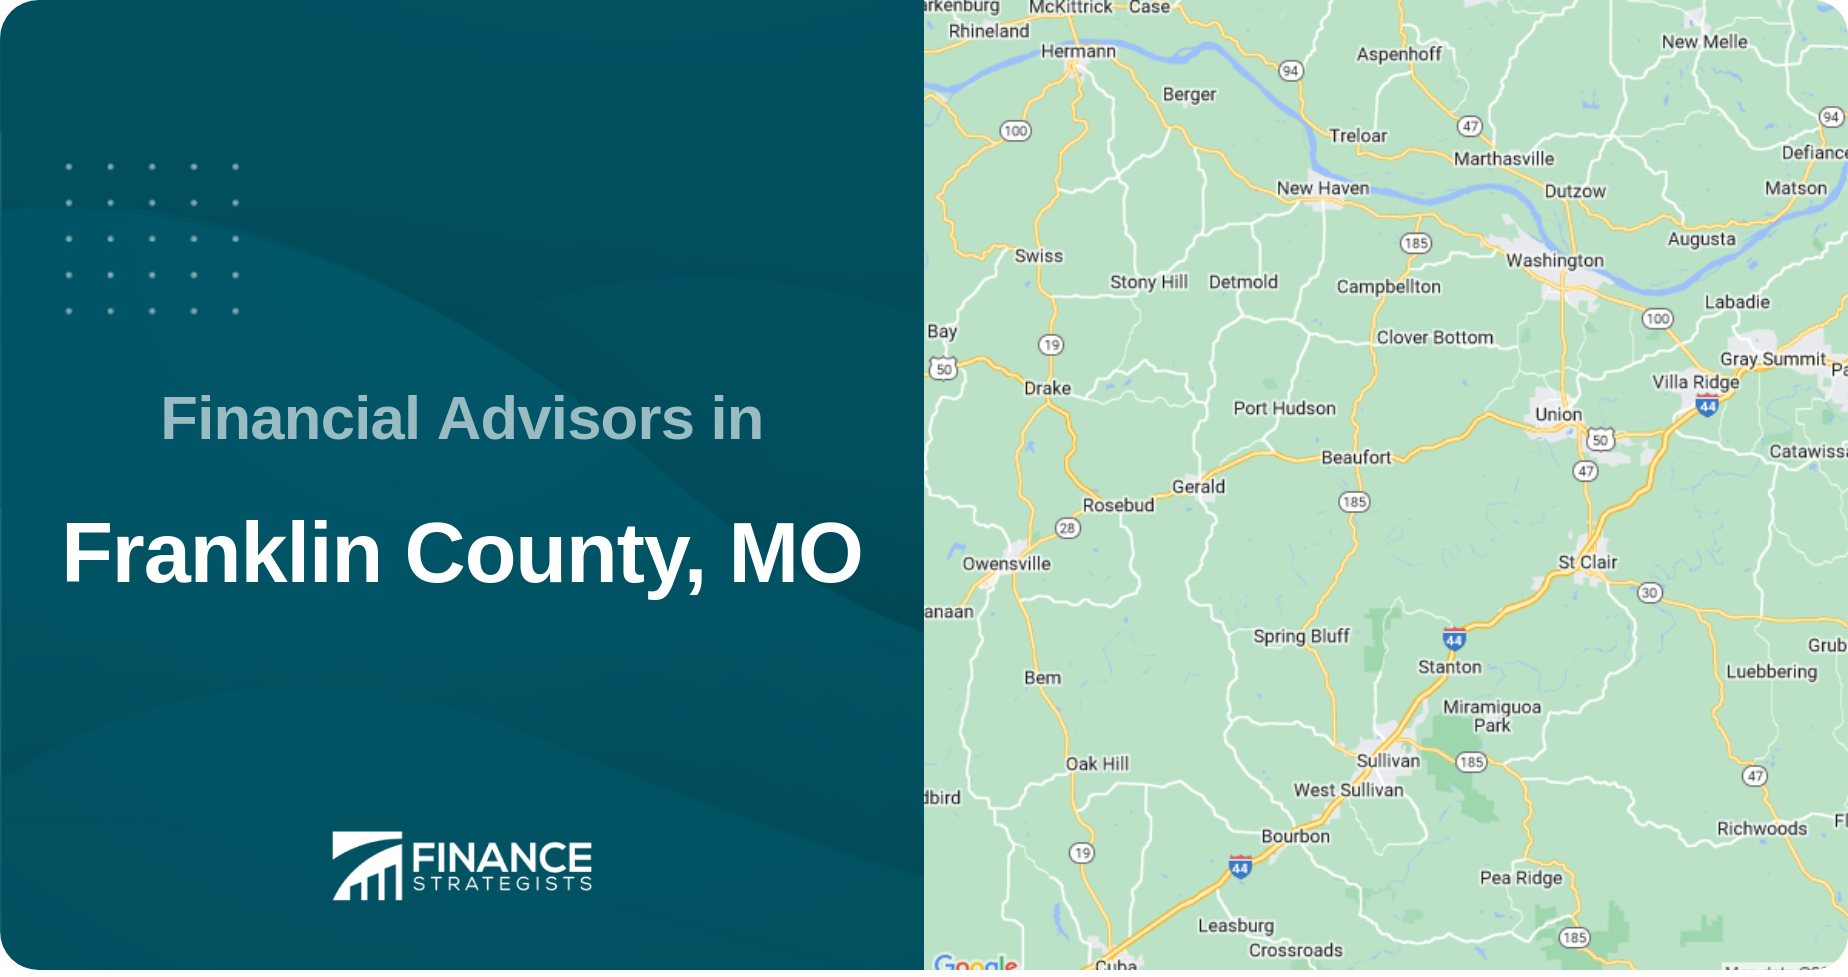 Financial Advisors in Franklin County, MO